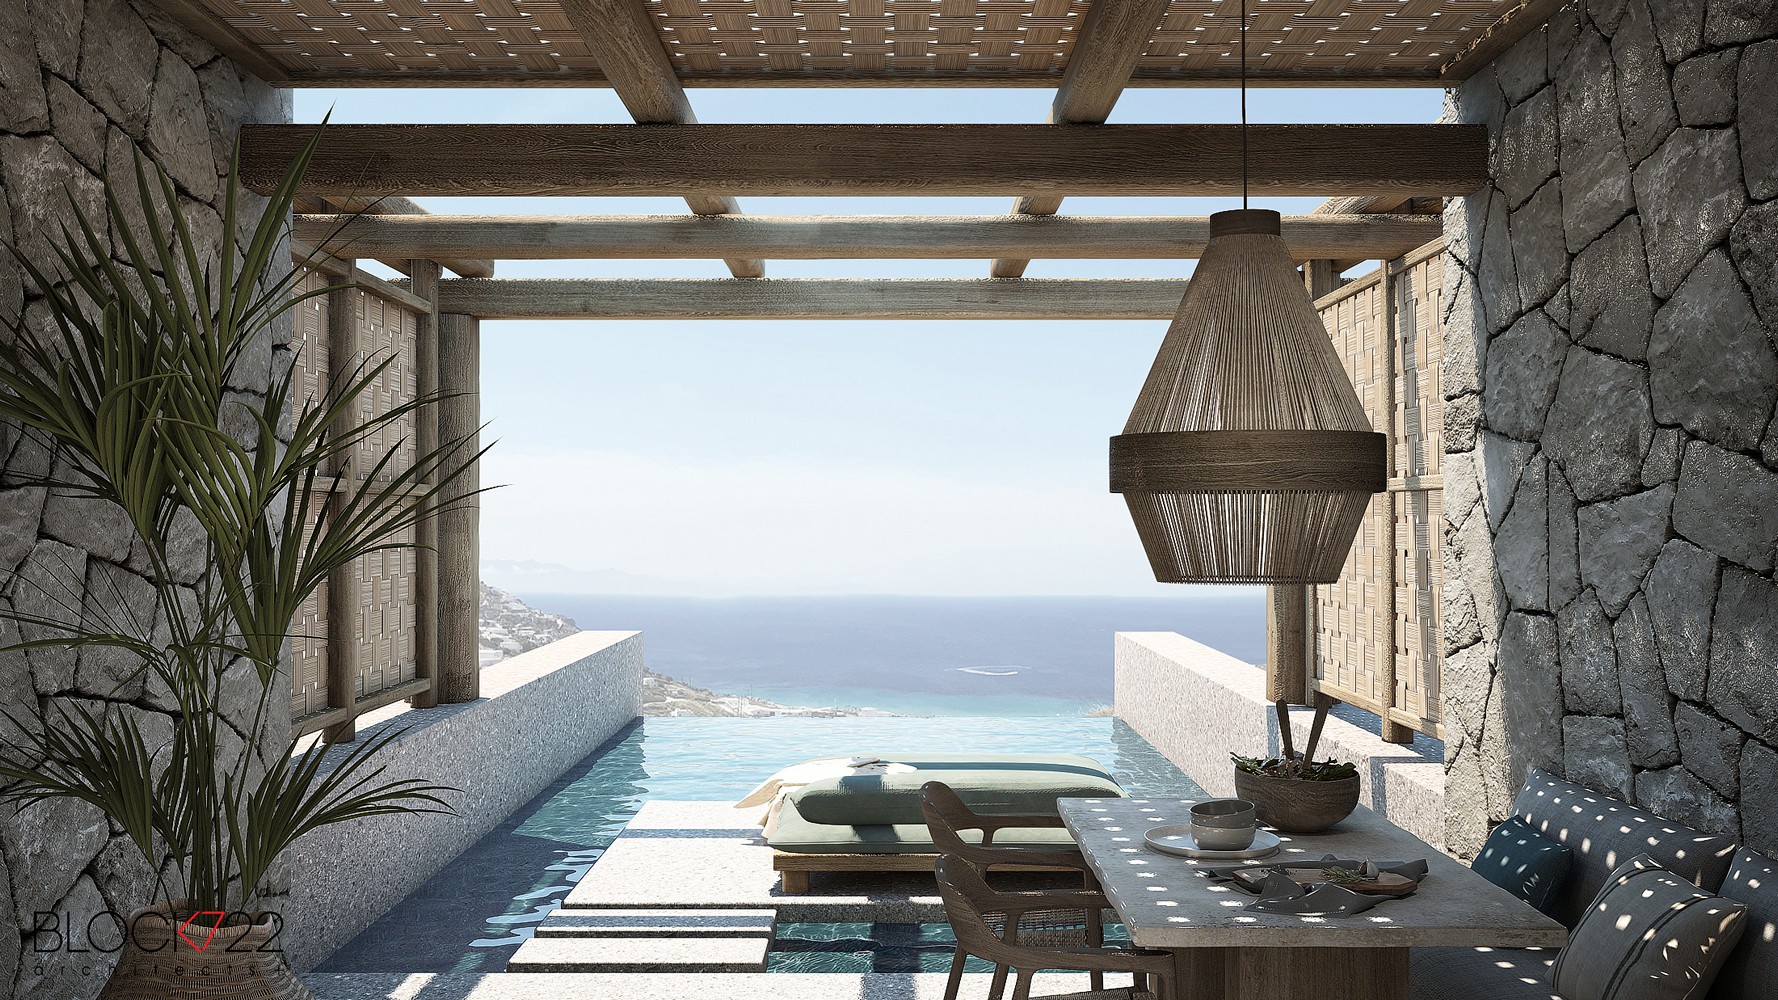 Outdoor area of one of the private villas in Mykonos